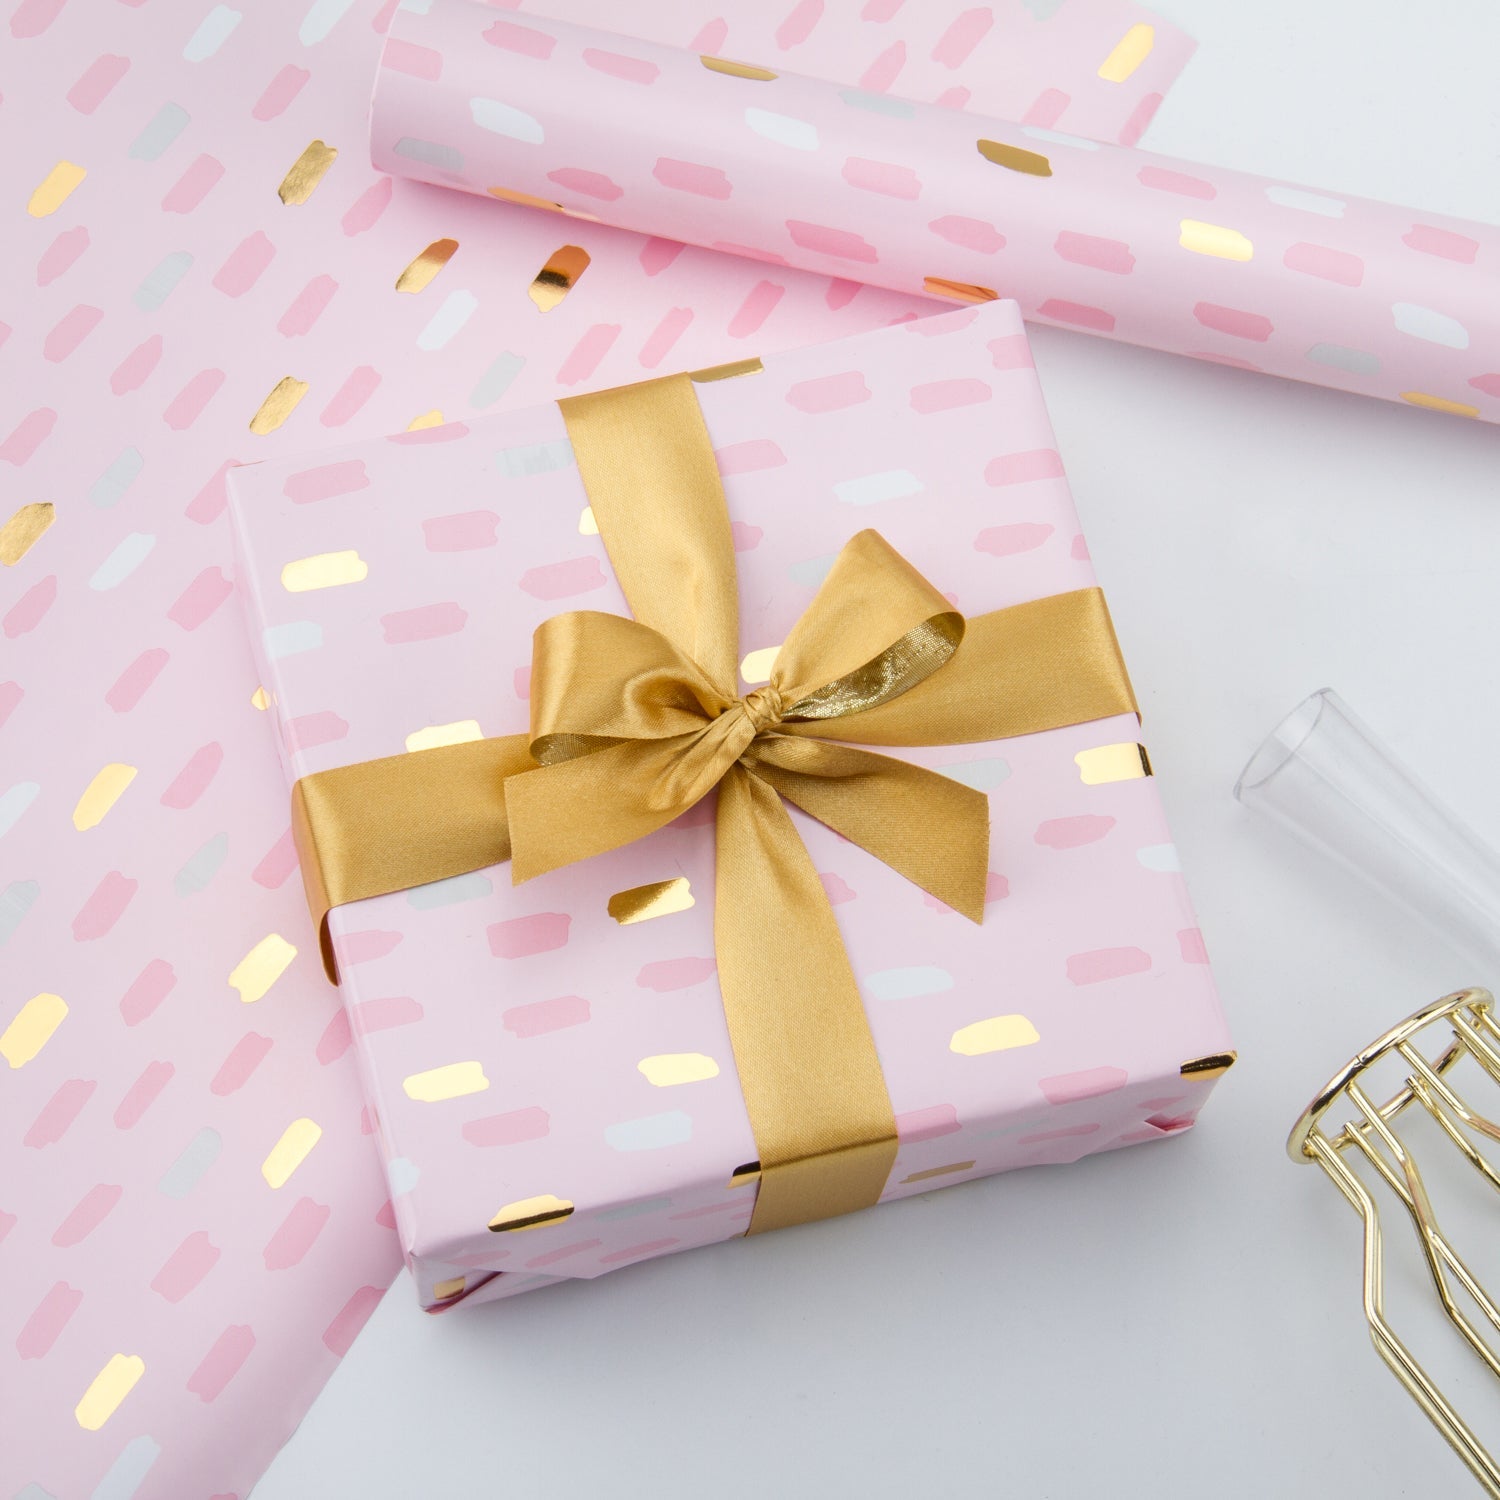 Wrapping Paper Roll- Pink and Gold Foil Brushstroke Design - 30inch x 16.5 Feet